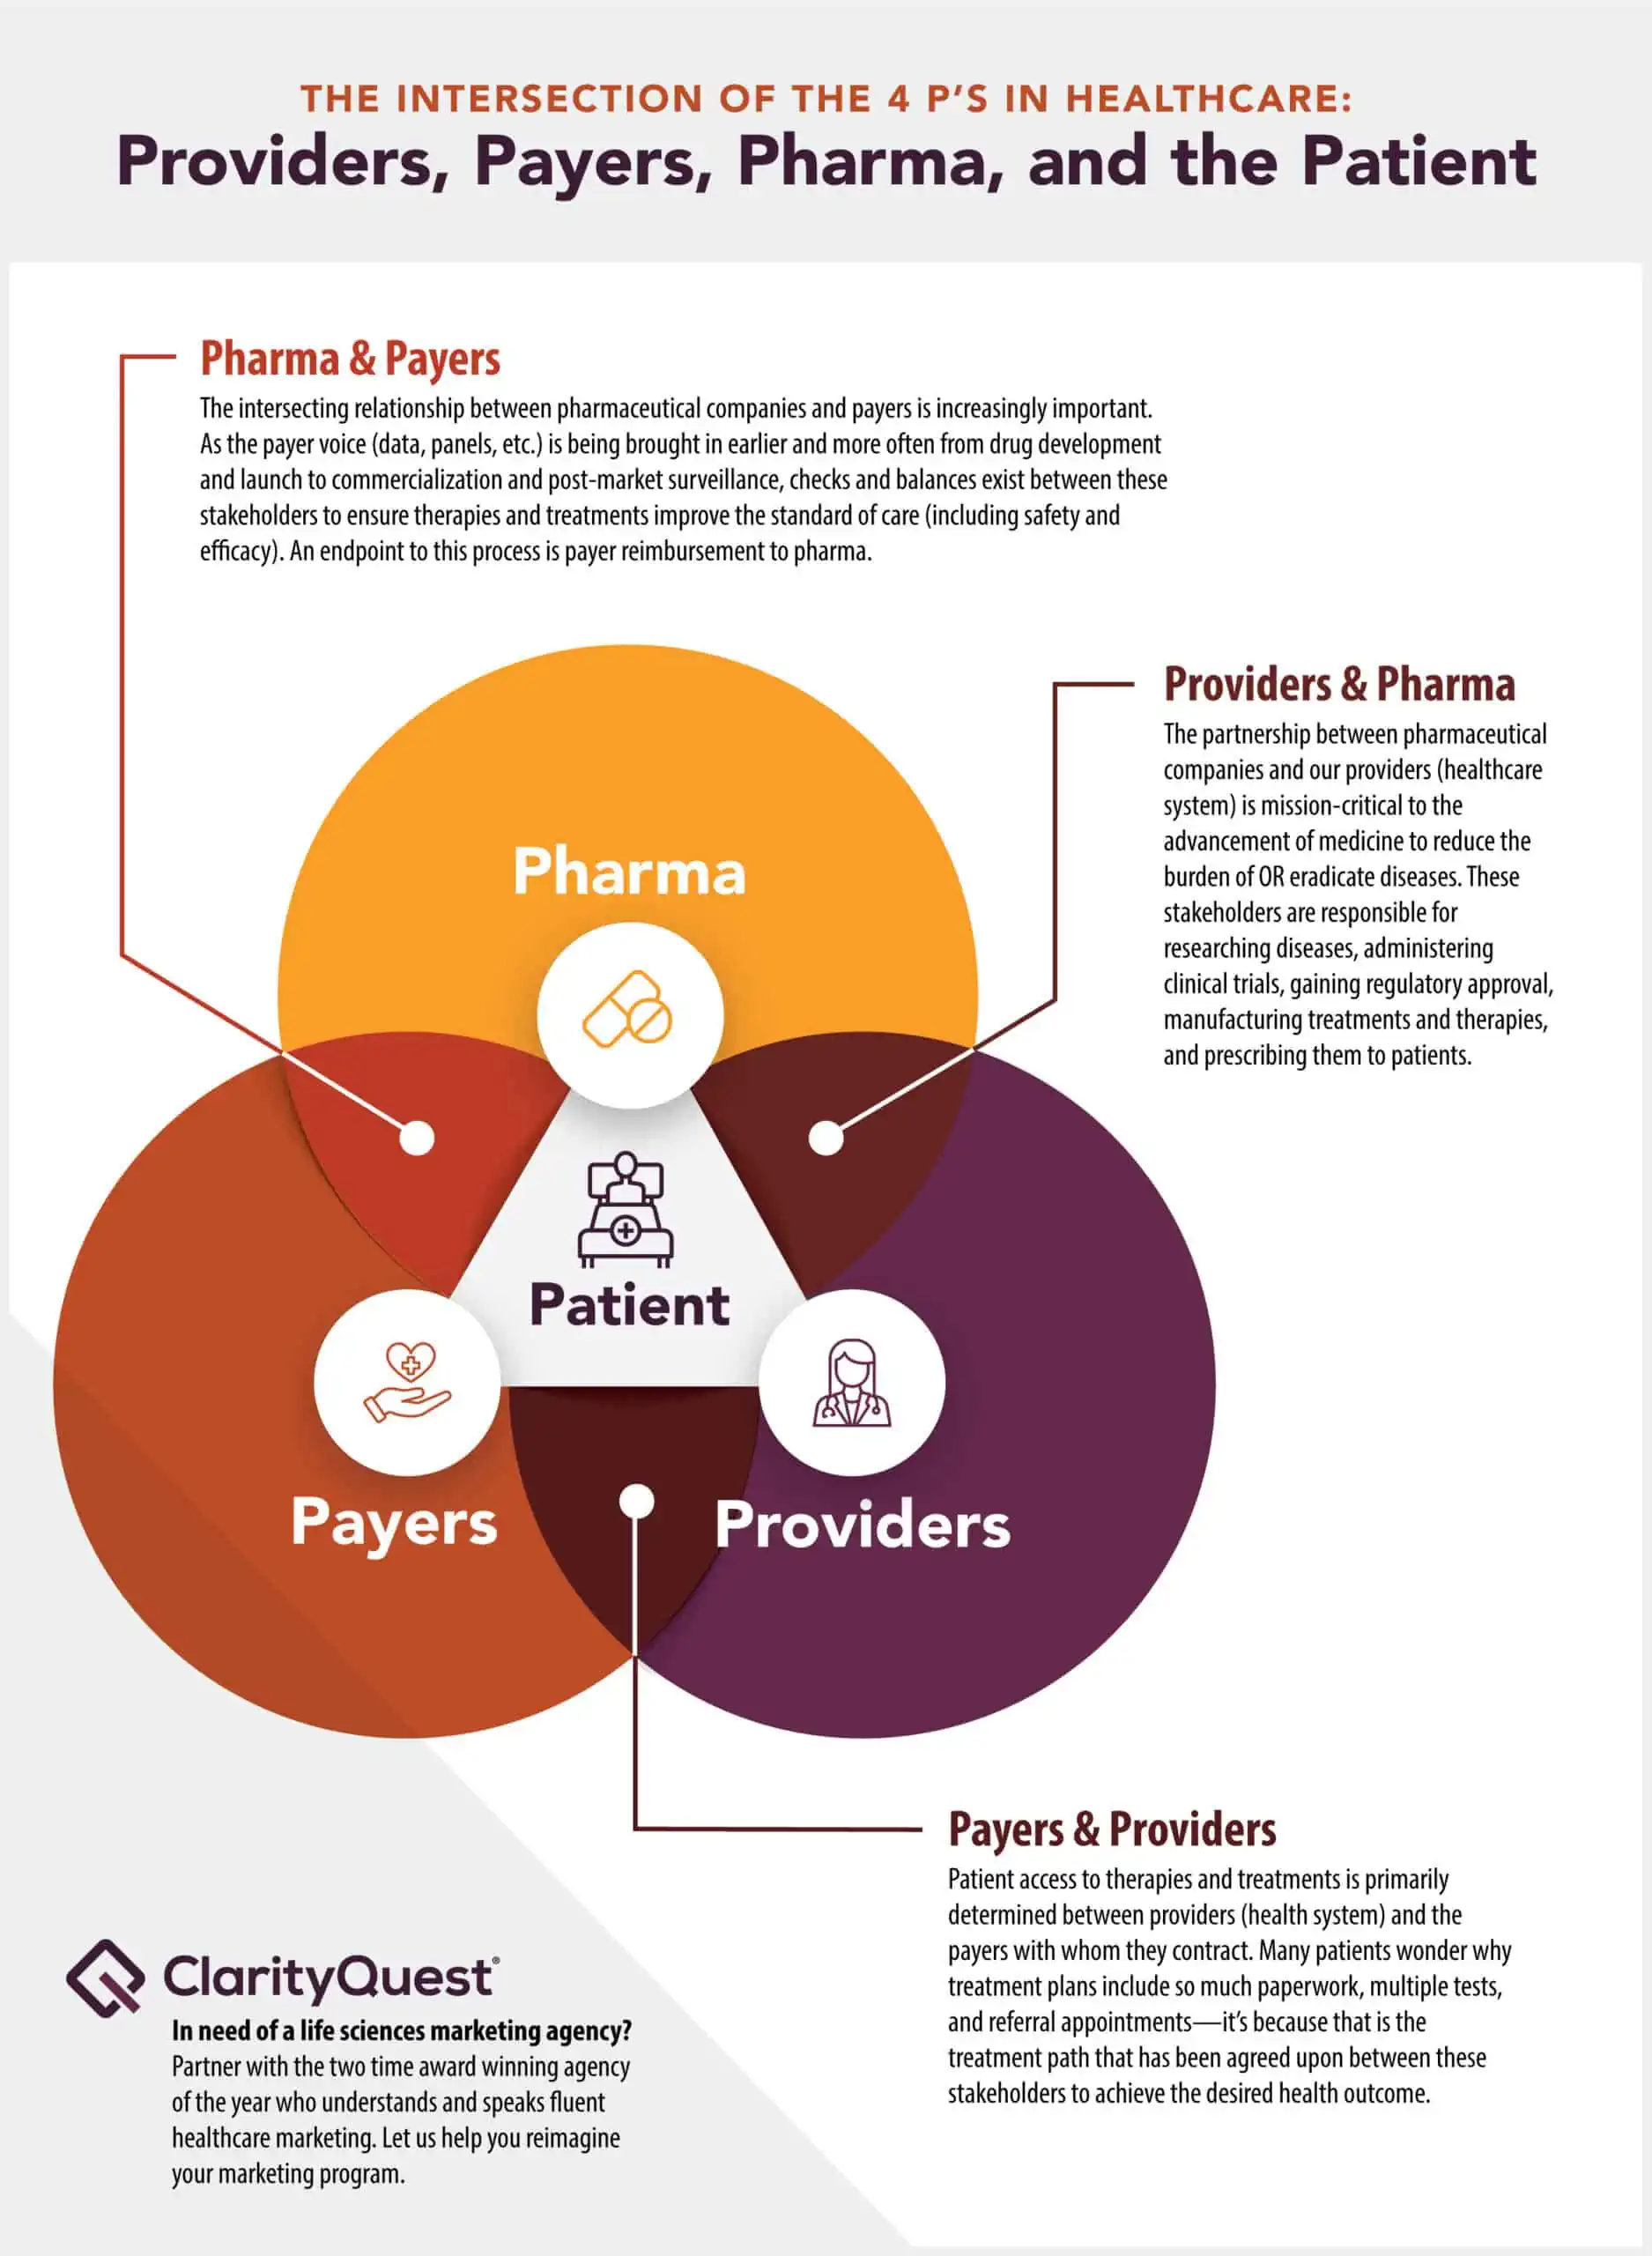 Infographic that shows the intersection of providers, payers, pharma, and the patient in healthcare